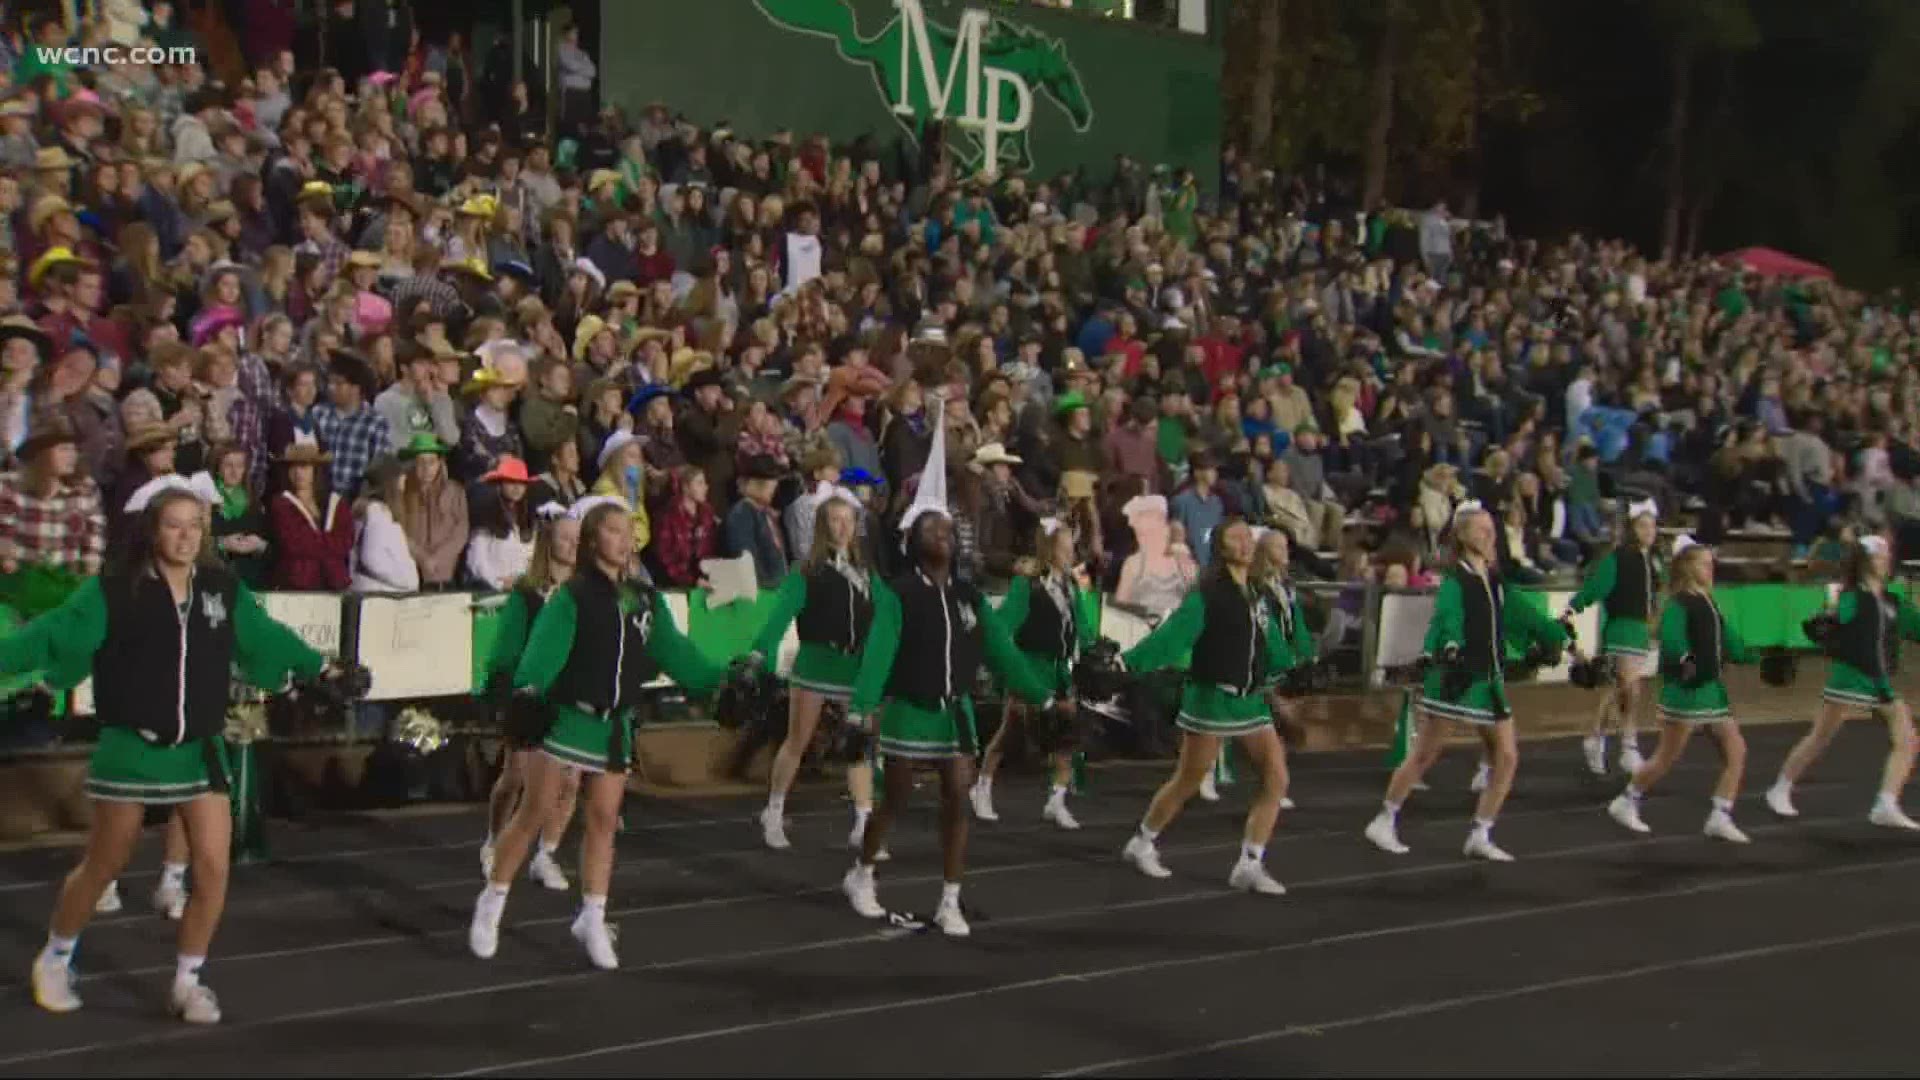 Starting Friday, Charlotte-Mecklenburg Schools will allow more parents and fans to attend outdoor spring sporting events, including football playoff games.